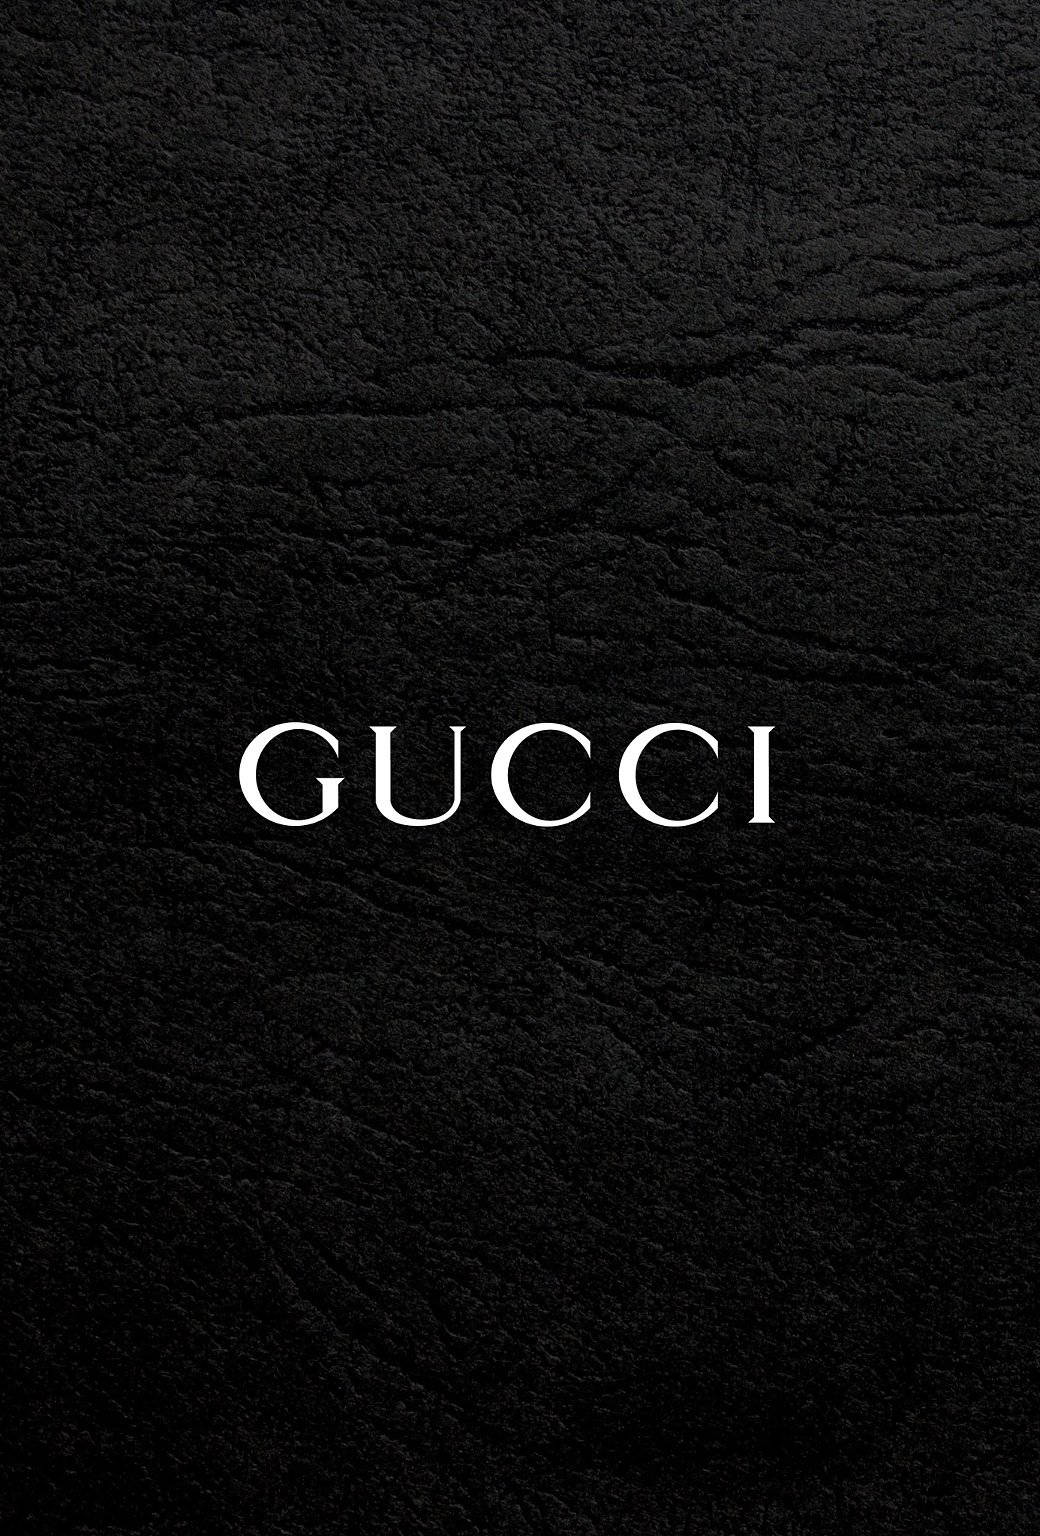 1040X1536 Gucci Wallpaper and Background